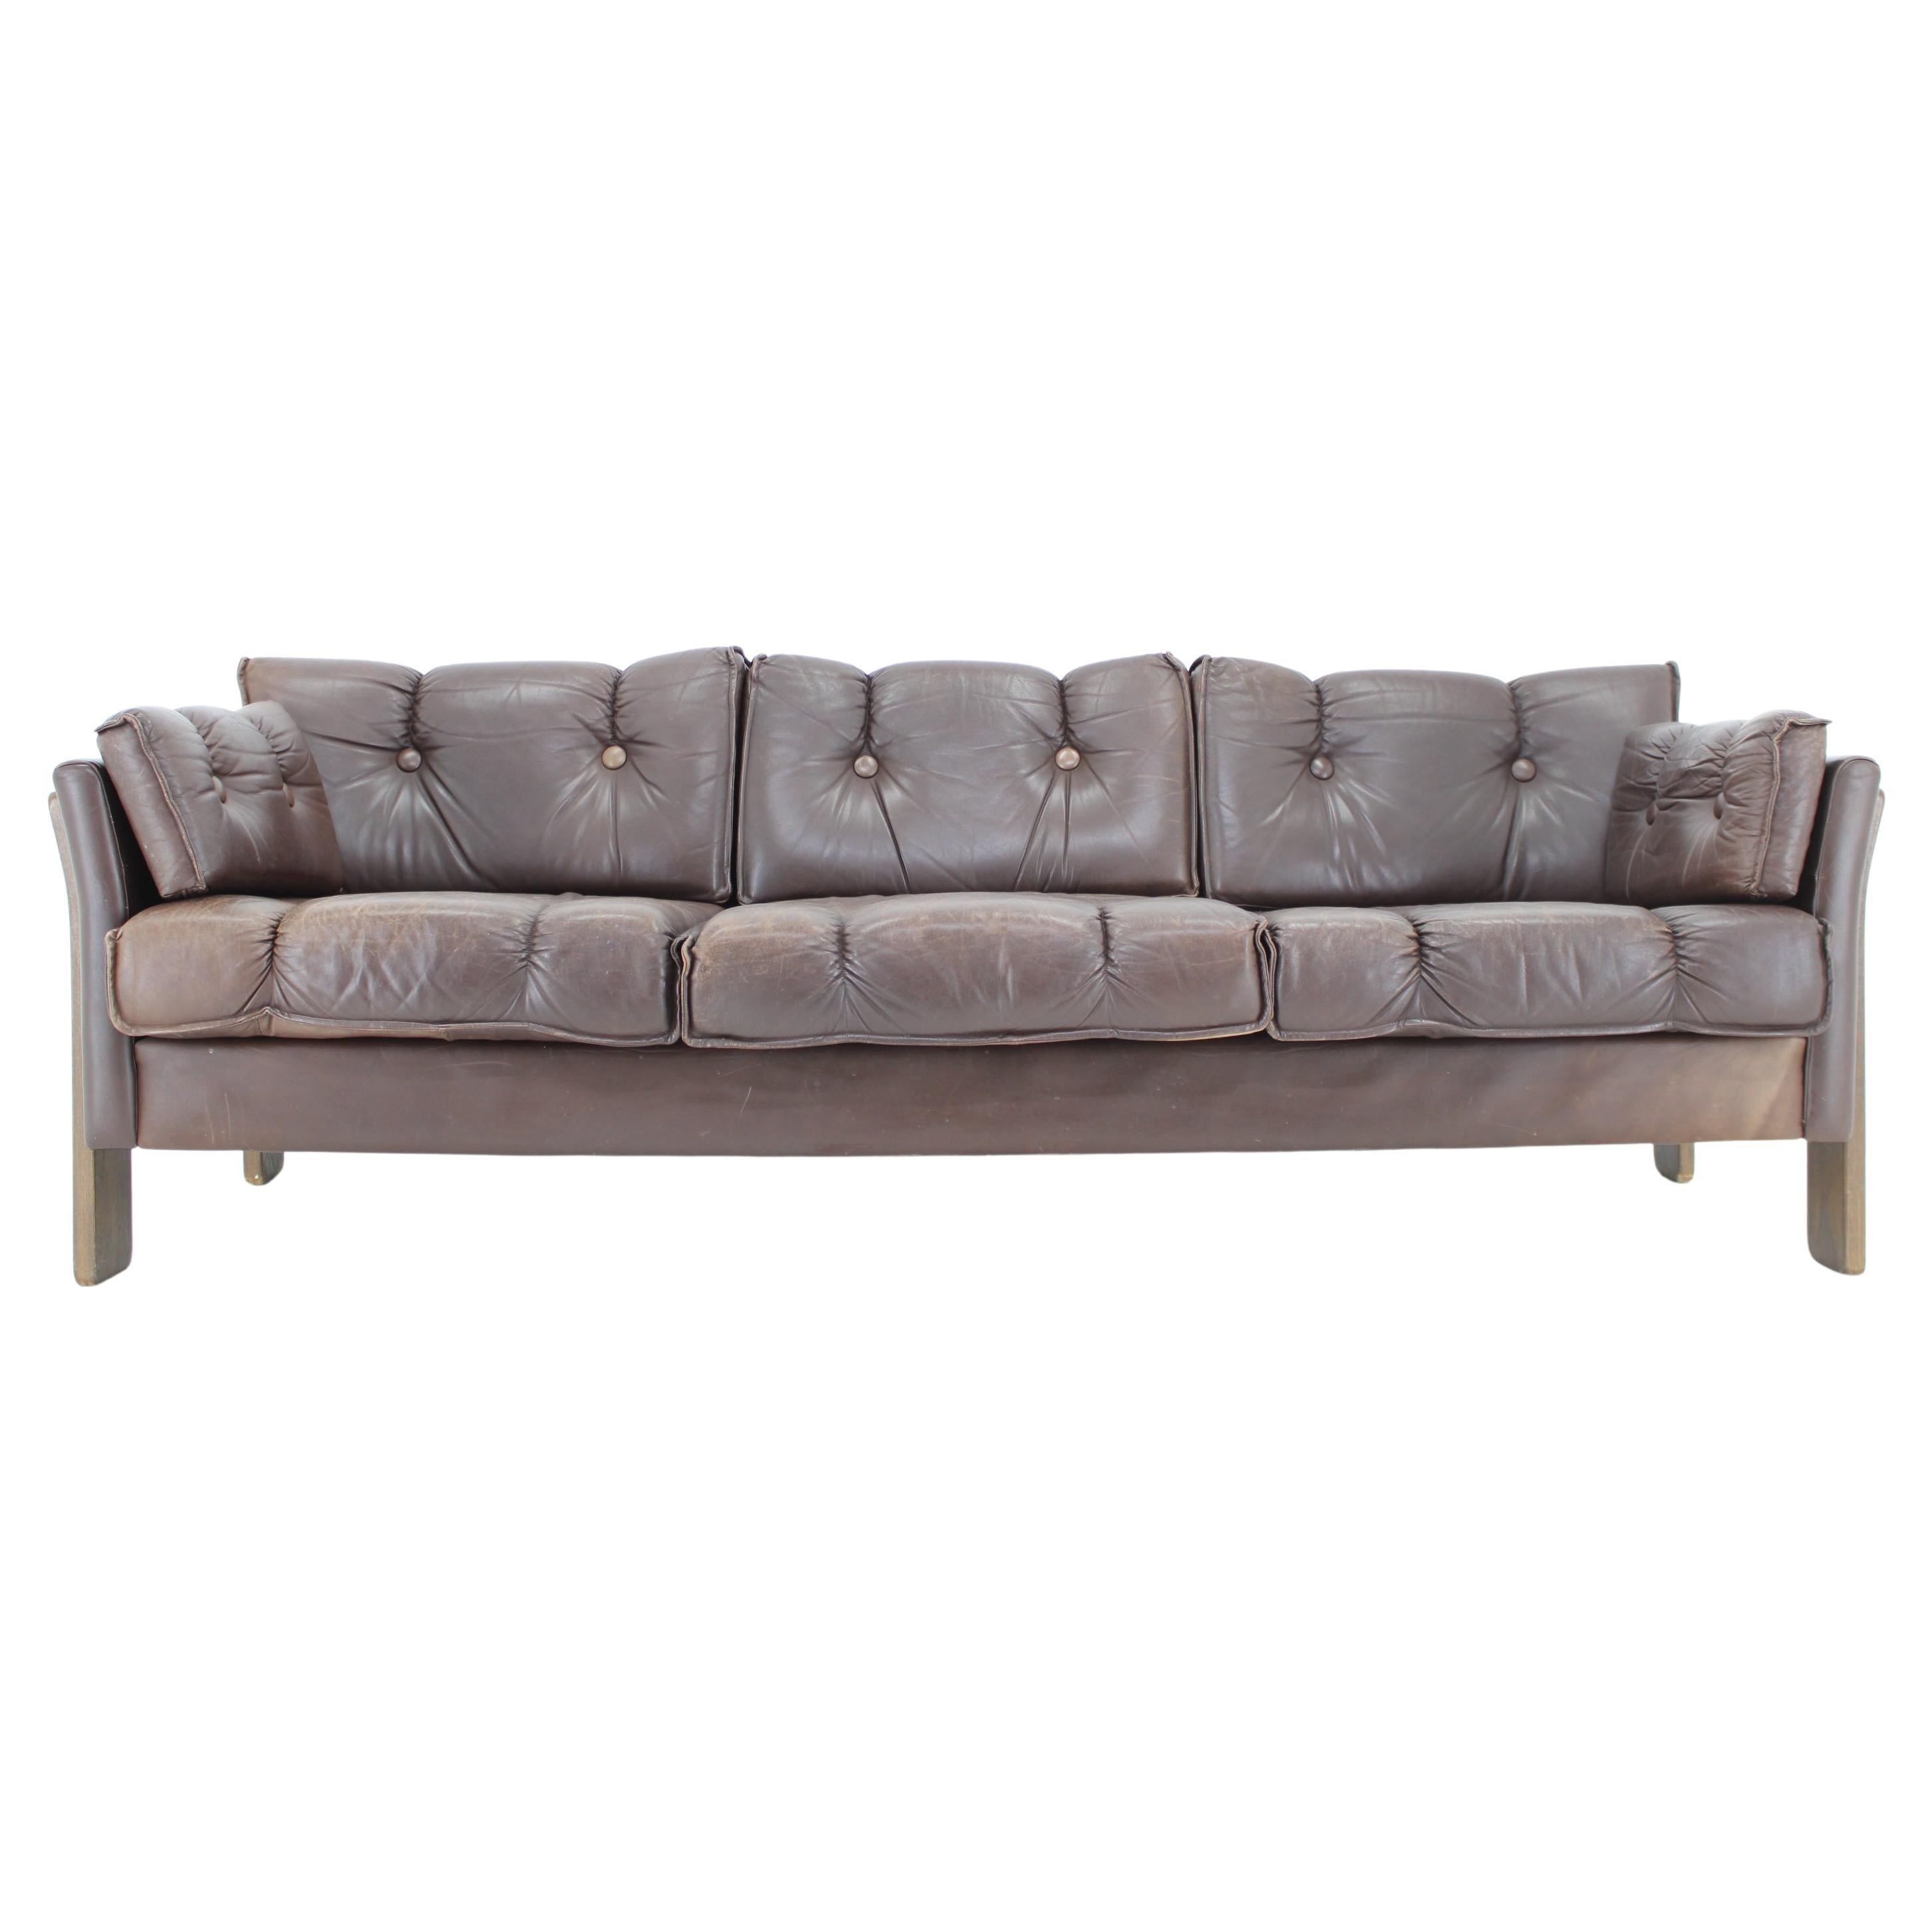 1970s Brown Leather 3-Seater Sofa, Denmark For Sale